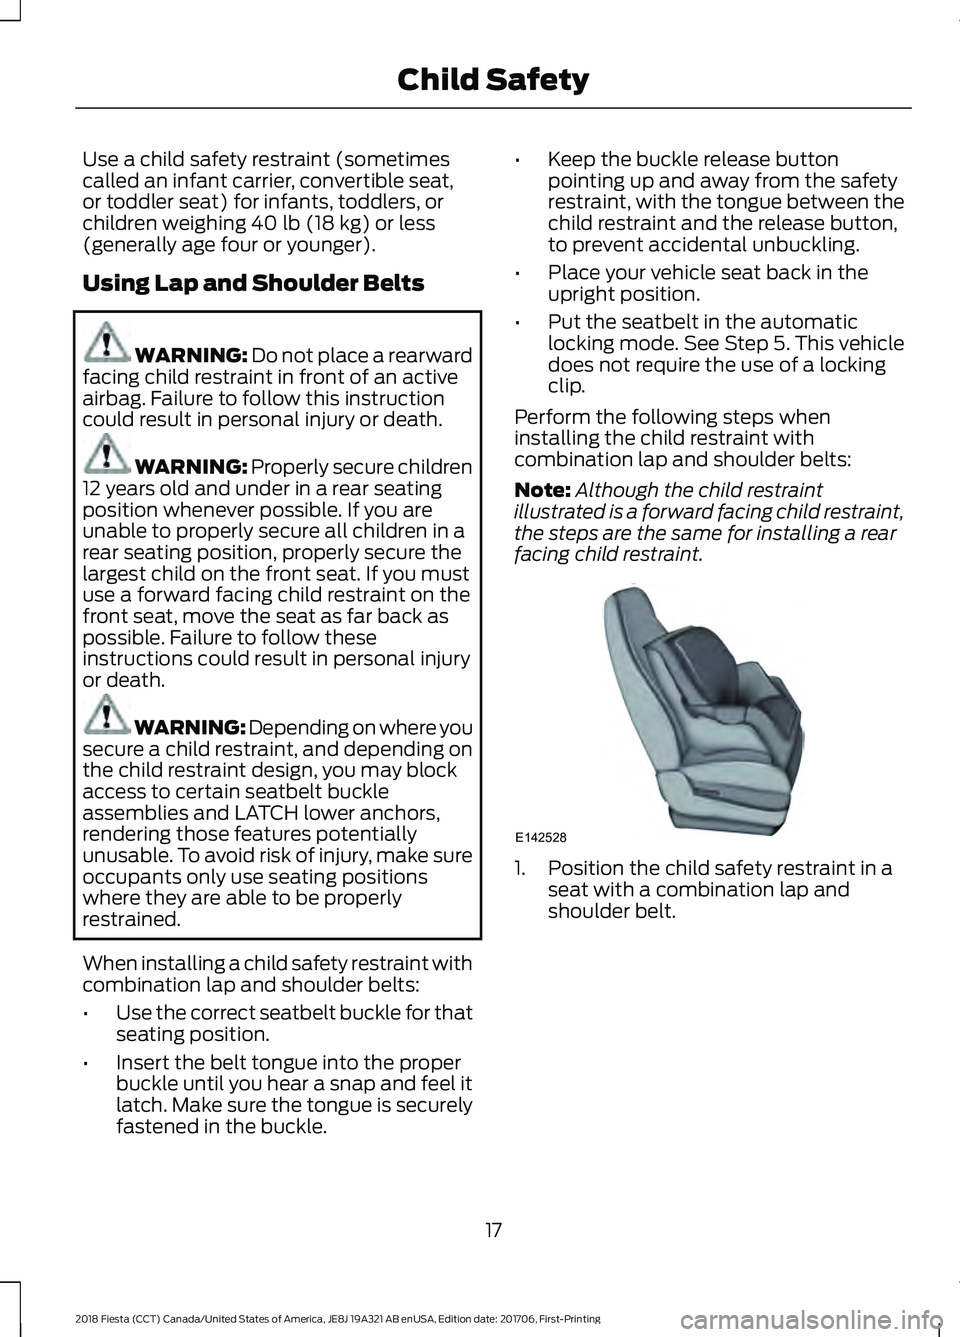 FORD FIESTA 2018  Owners Manual Use a child safety restraint (sometimes
called an infant carrier, convertible seat,
or toddler seat) for infants, toddlers, or
children weighing 40 lb (18 kg) or less
(generally age four or younger).
